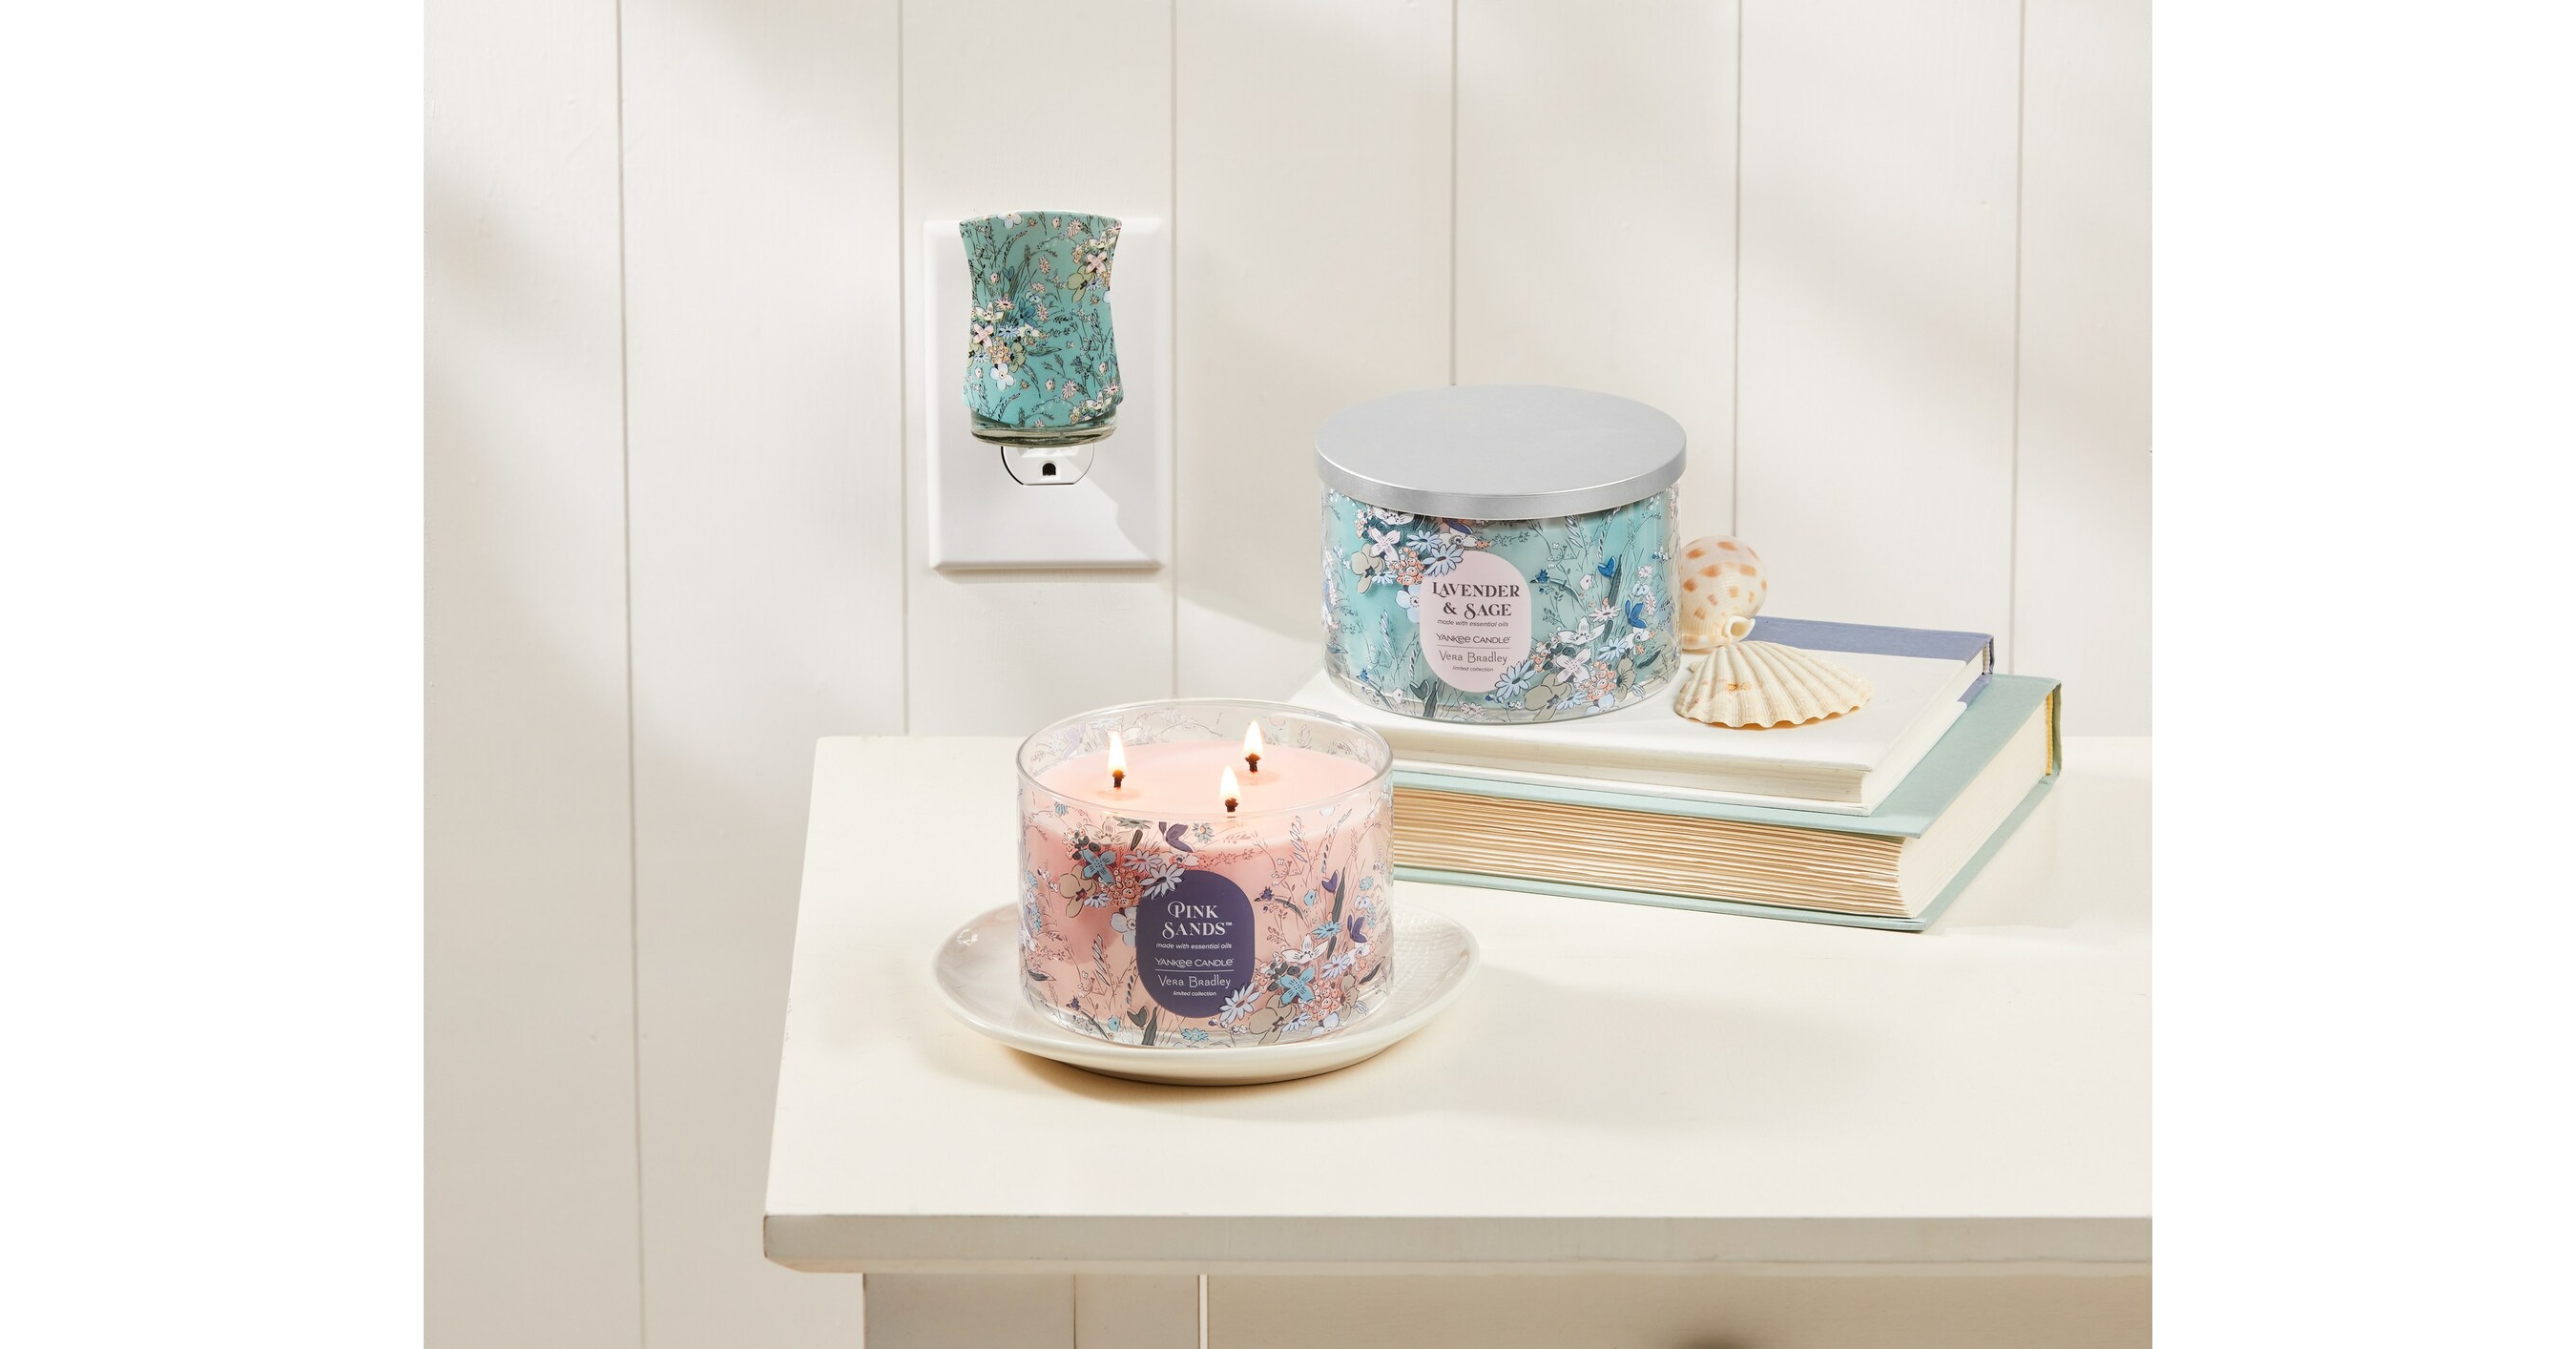 Yankee Candle Launches New Man Candles Collection